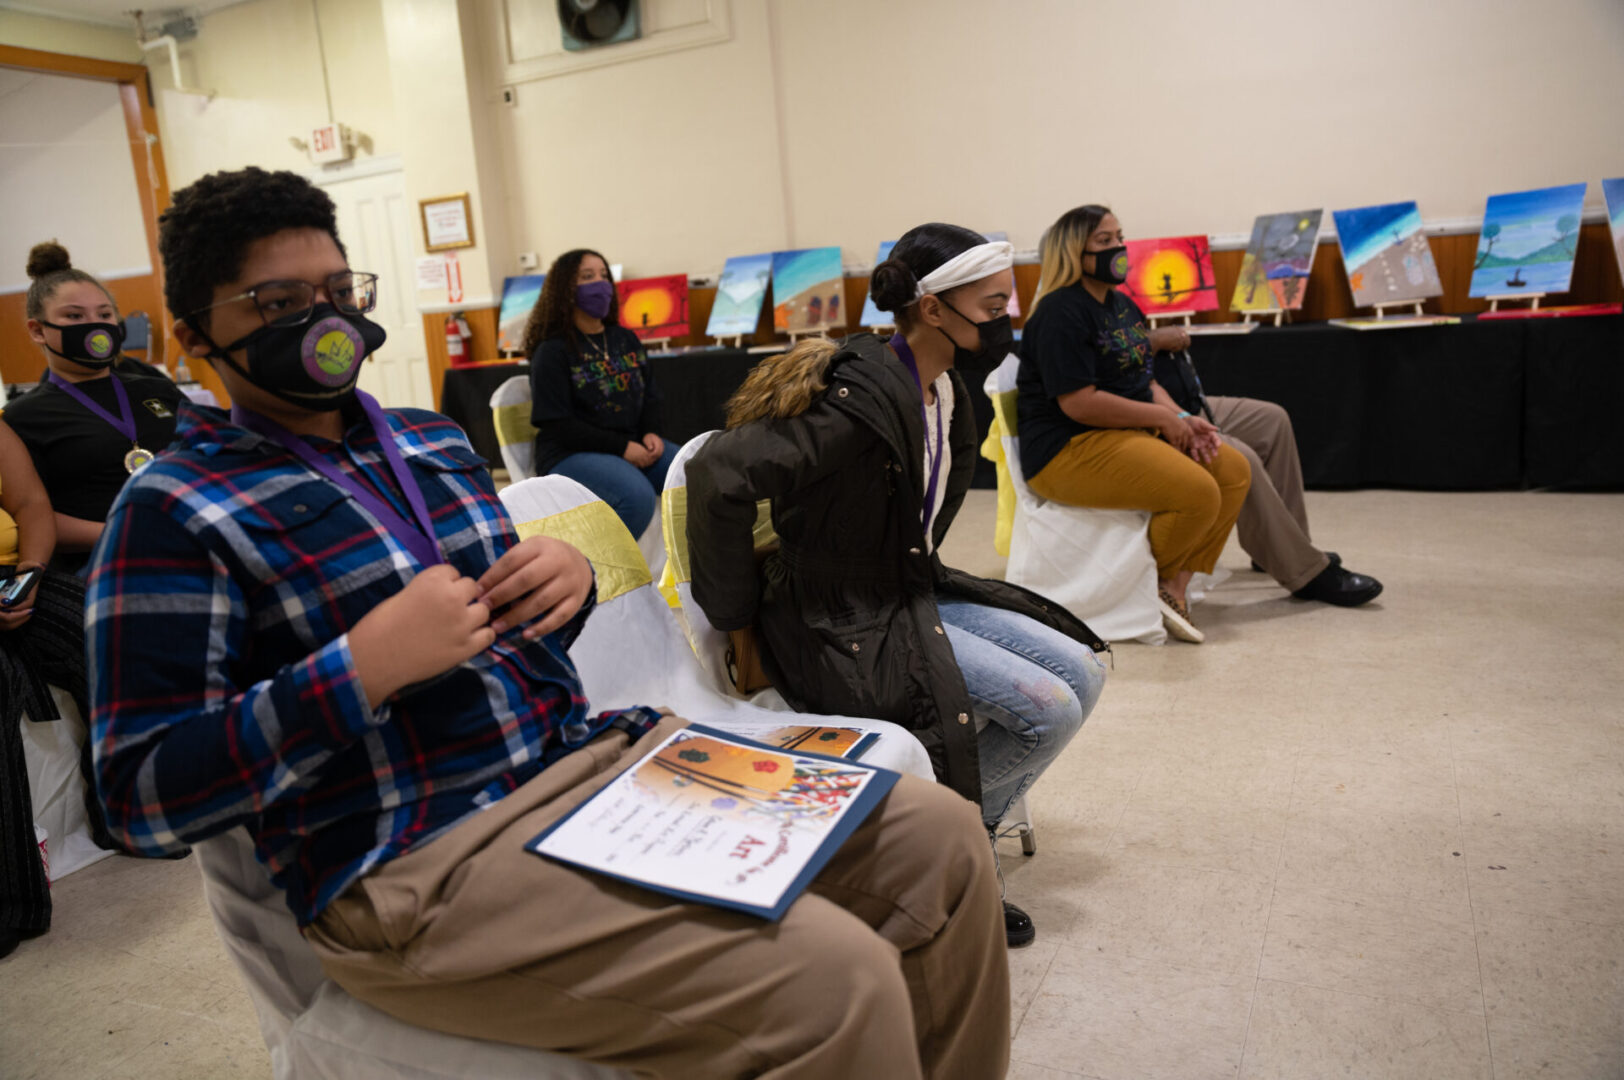 Attendees wearing masks and sitting on their chairs